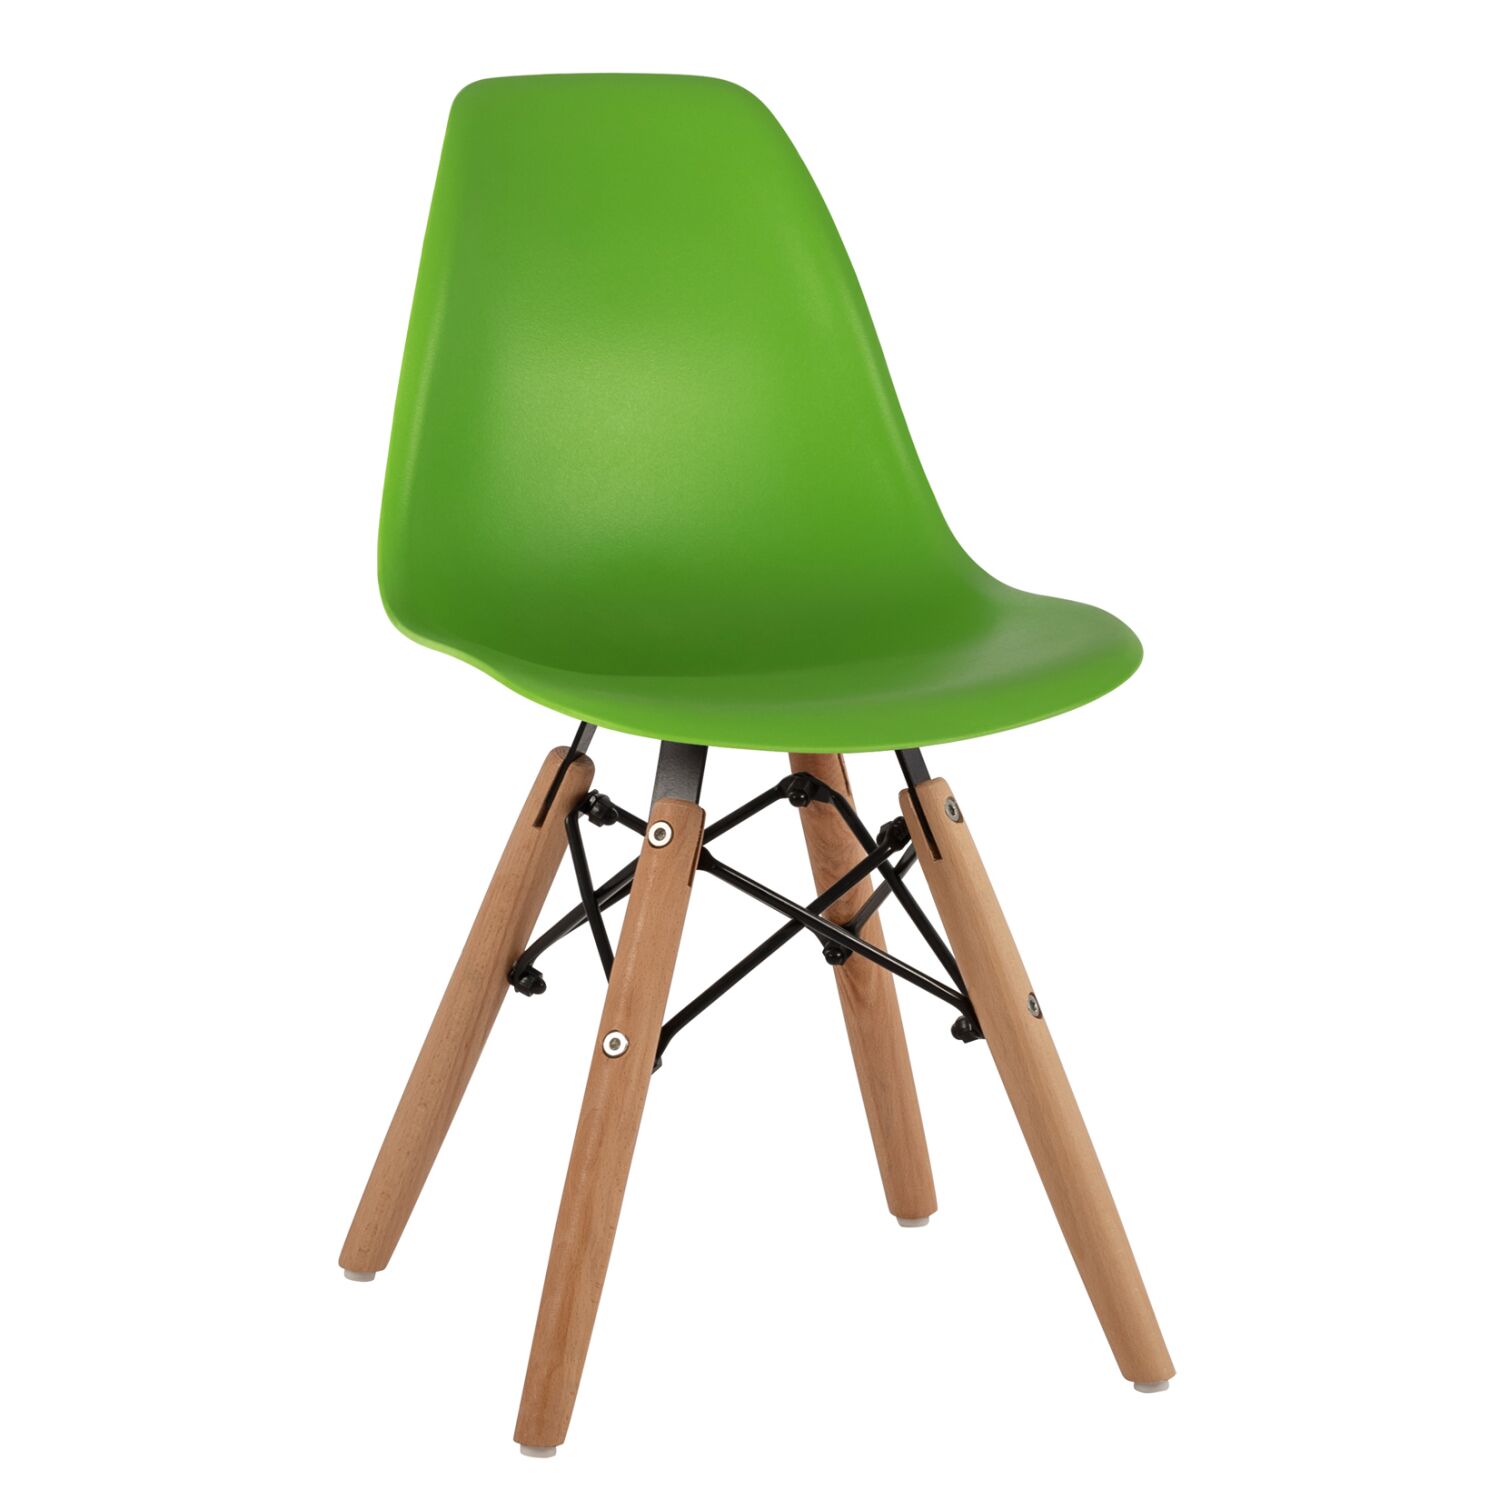 Chair Twist Kid HM8453.03 with wooden legs & green seat 30,5x33x59 cm